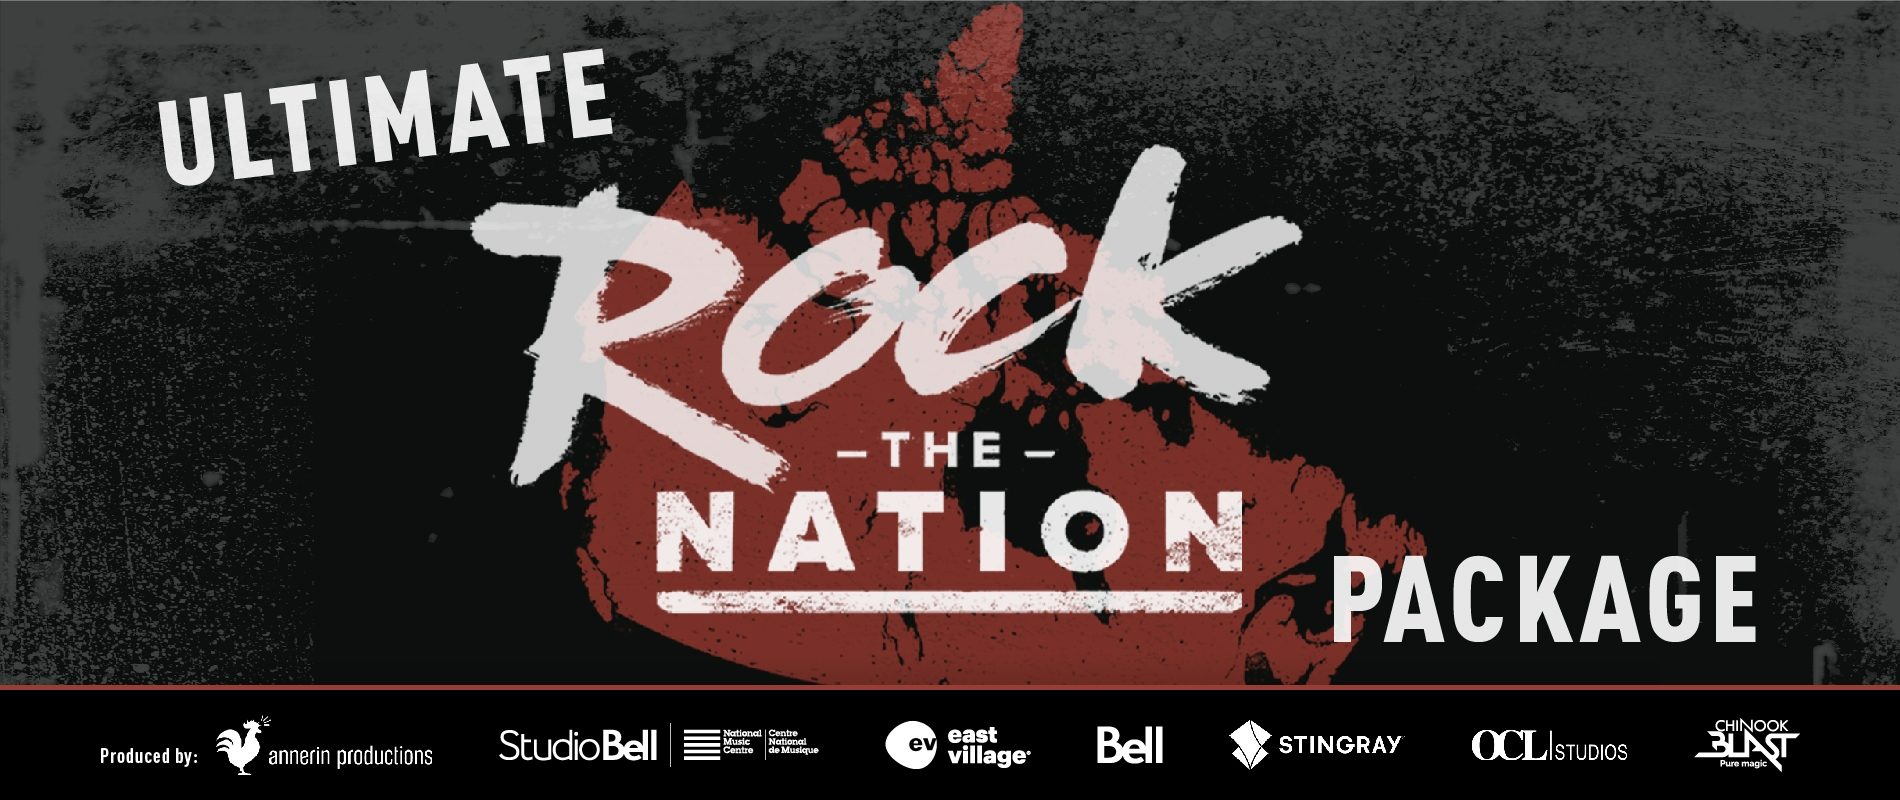 Ultimate Rock the Nation Package